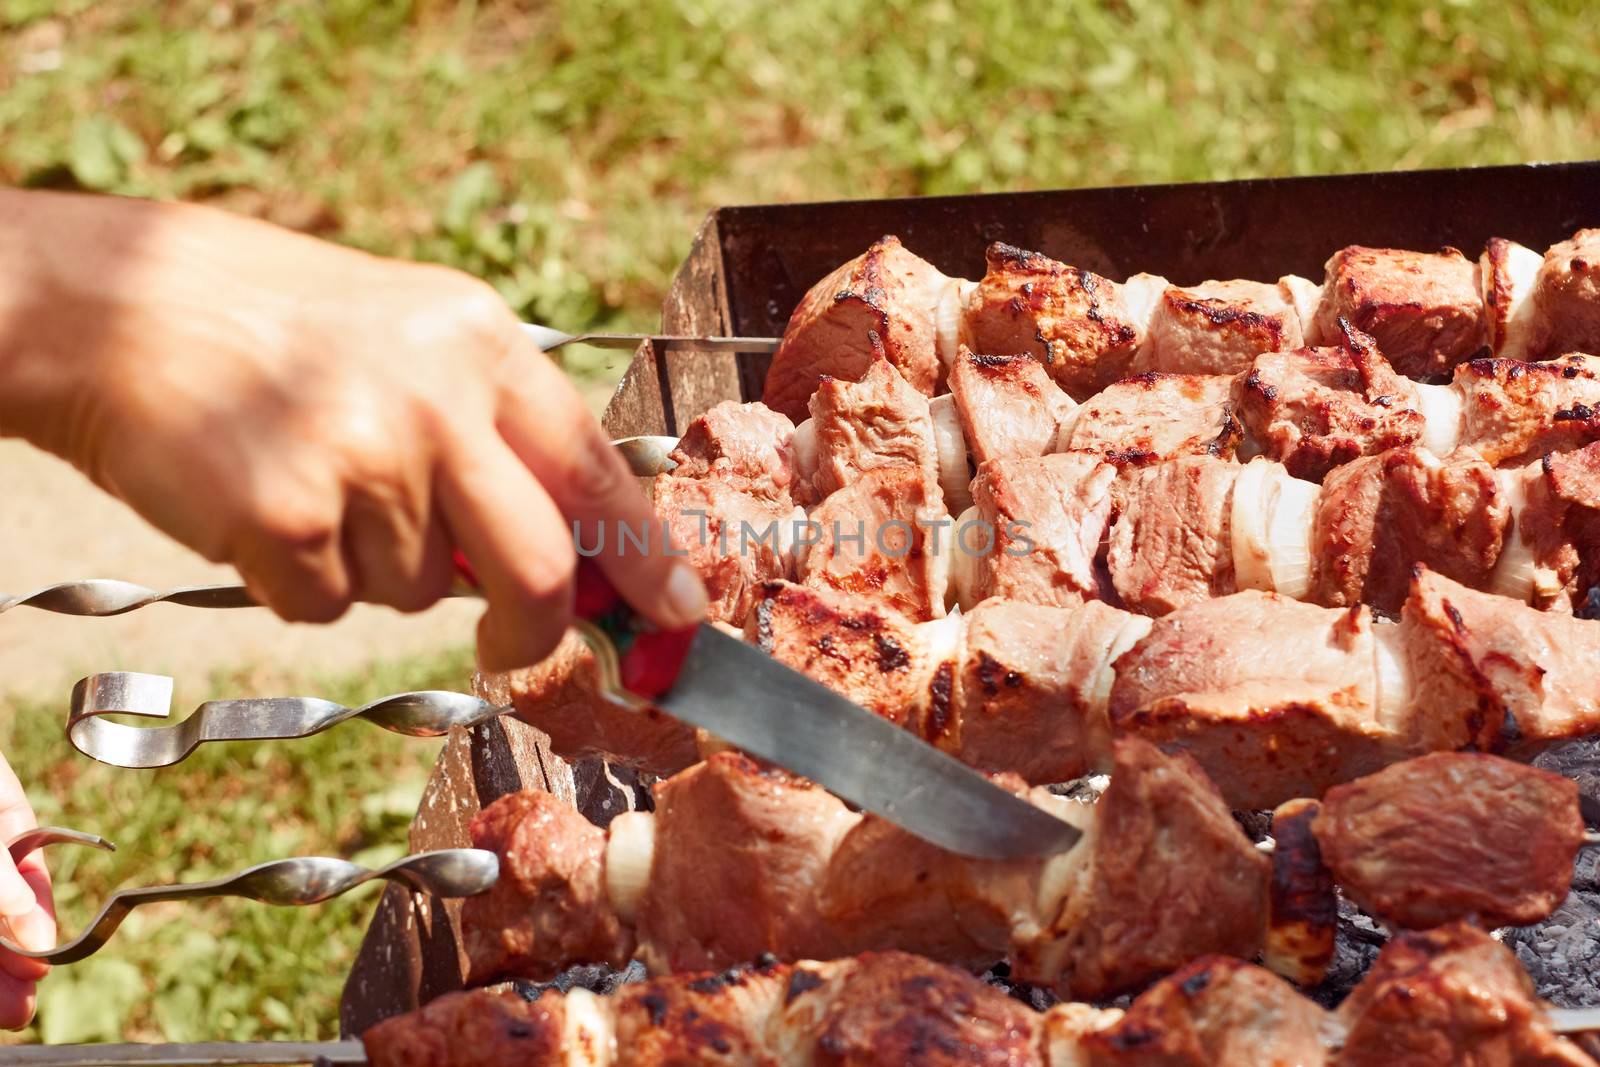 Preparation of meat slices on the metal skewers close up outdoors in summer